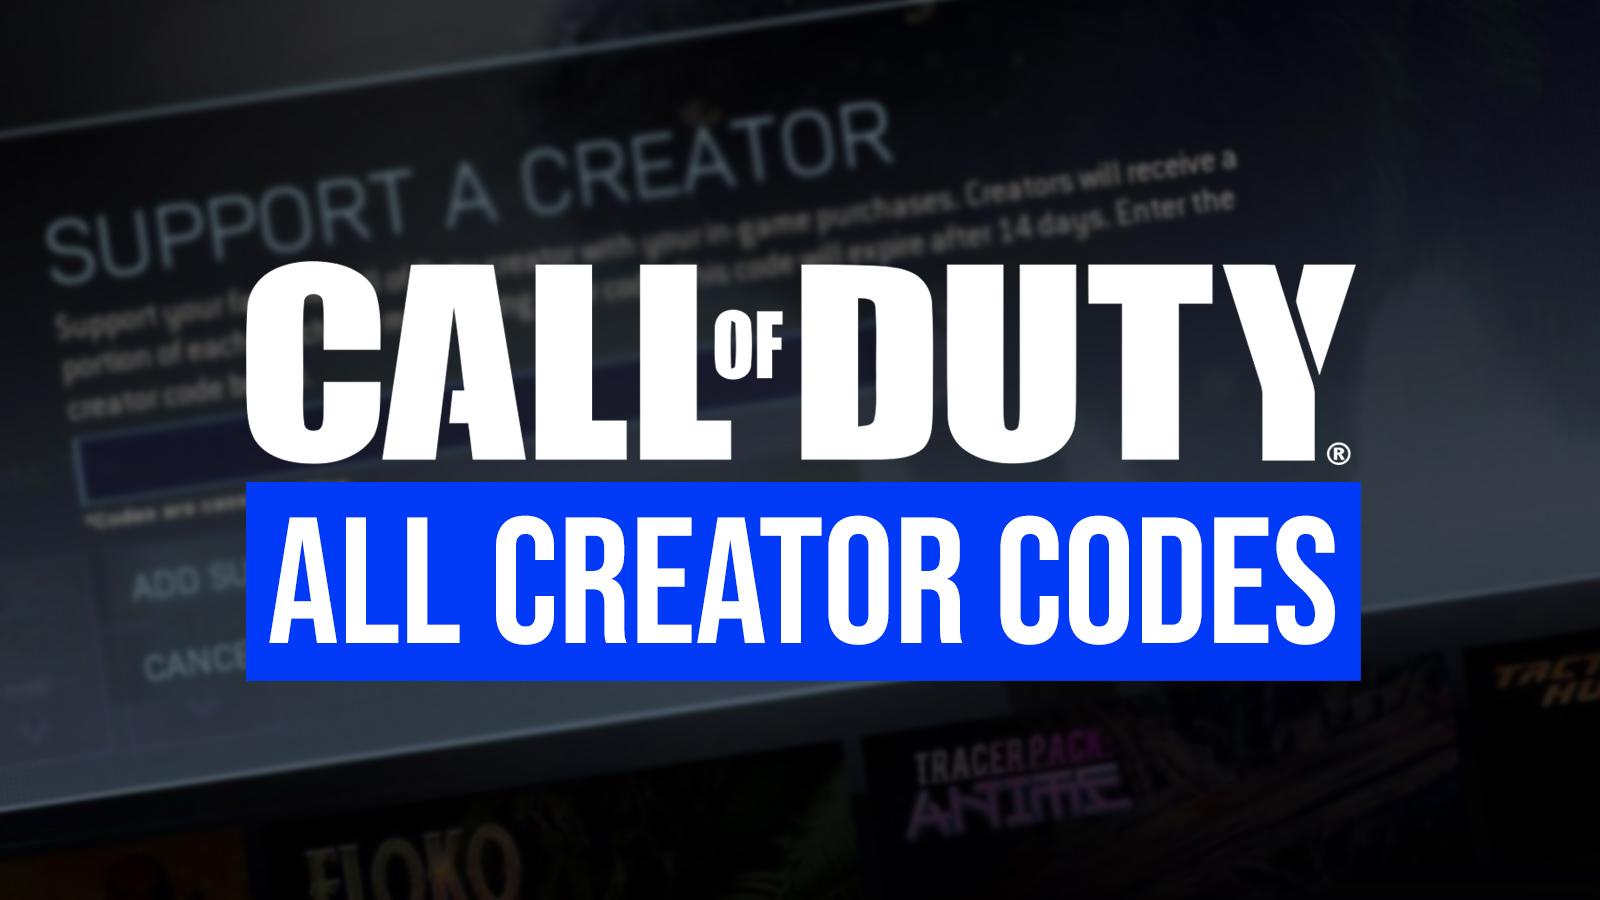 Gaming's most ridiculous button prompts, including Call of Duty's